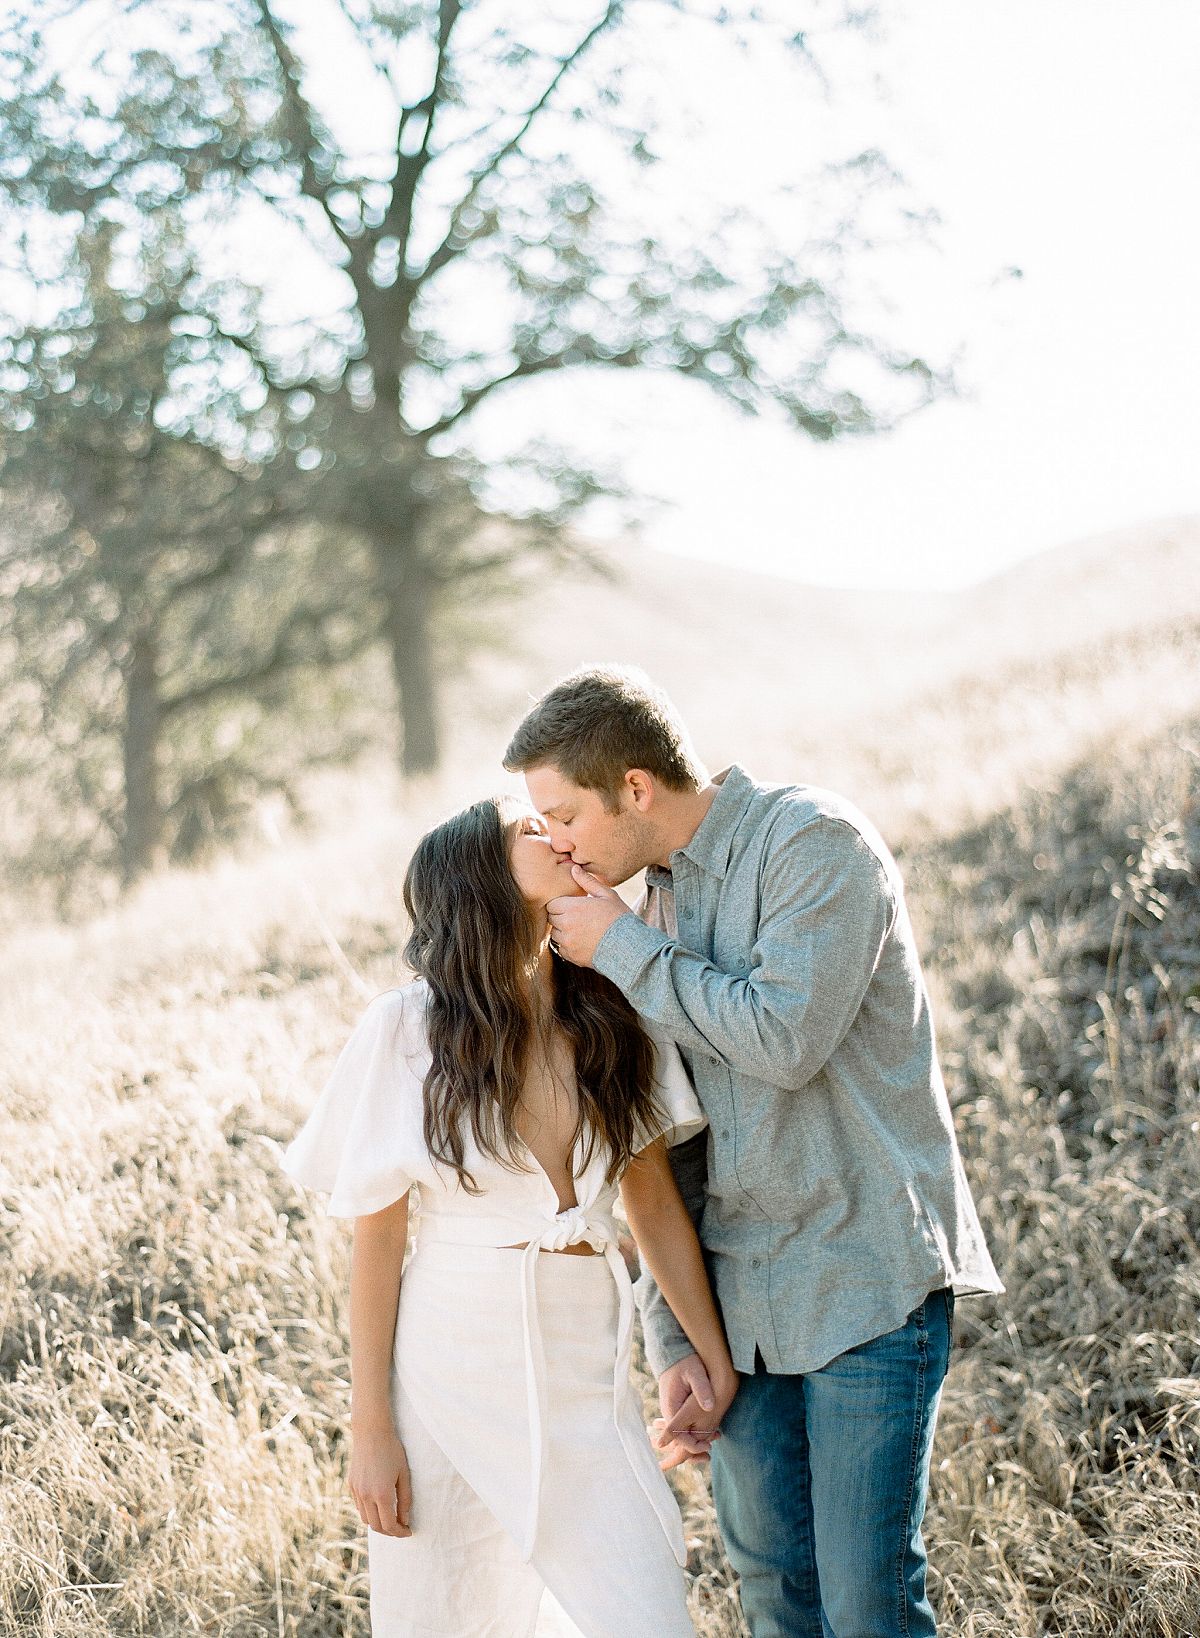 Lifestyle Engagement Session in Southern California